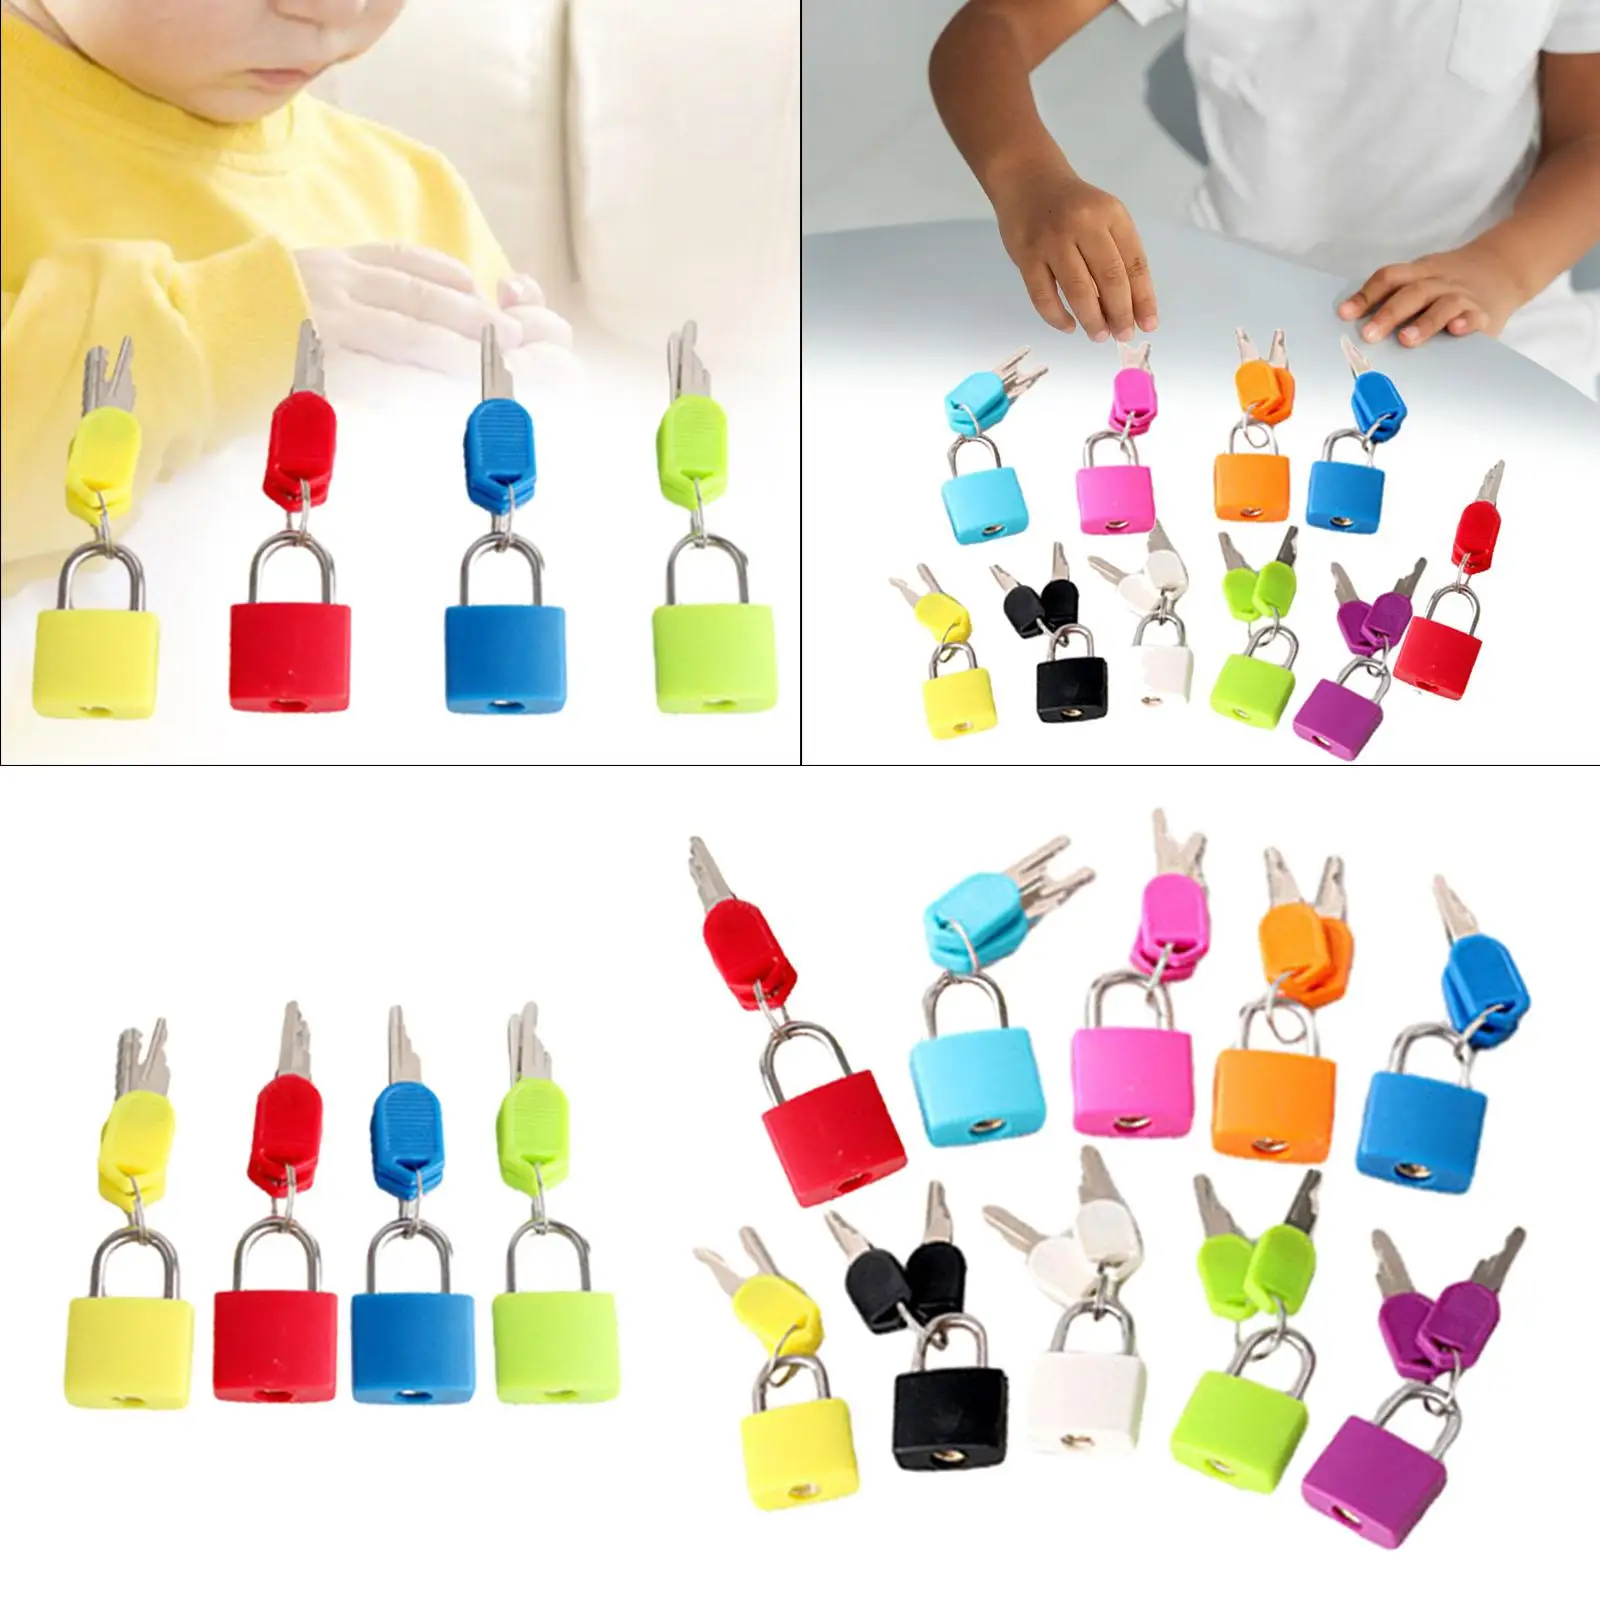 Kids Learning Locks with Keys Preschool Games Educational Toys Montessori Material Color Matching Lock Set for Kids Toddlers